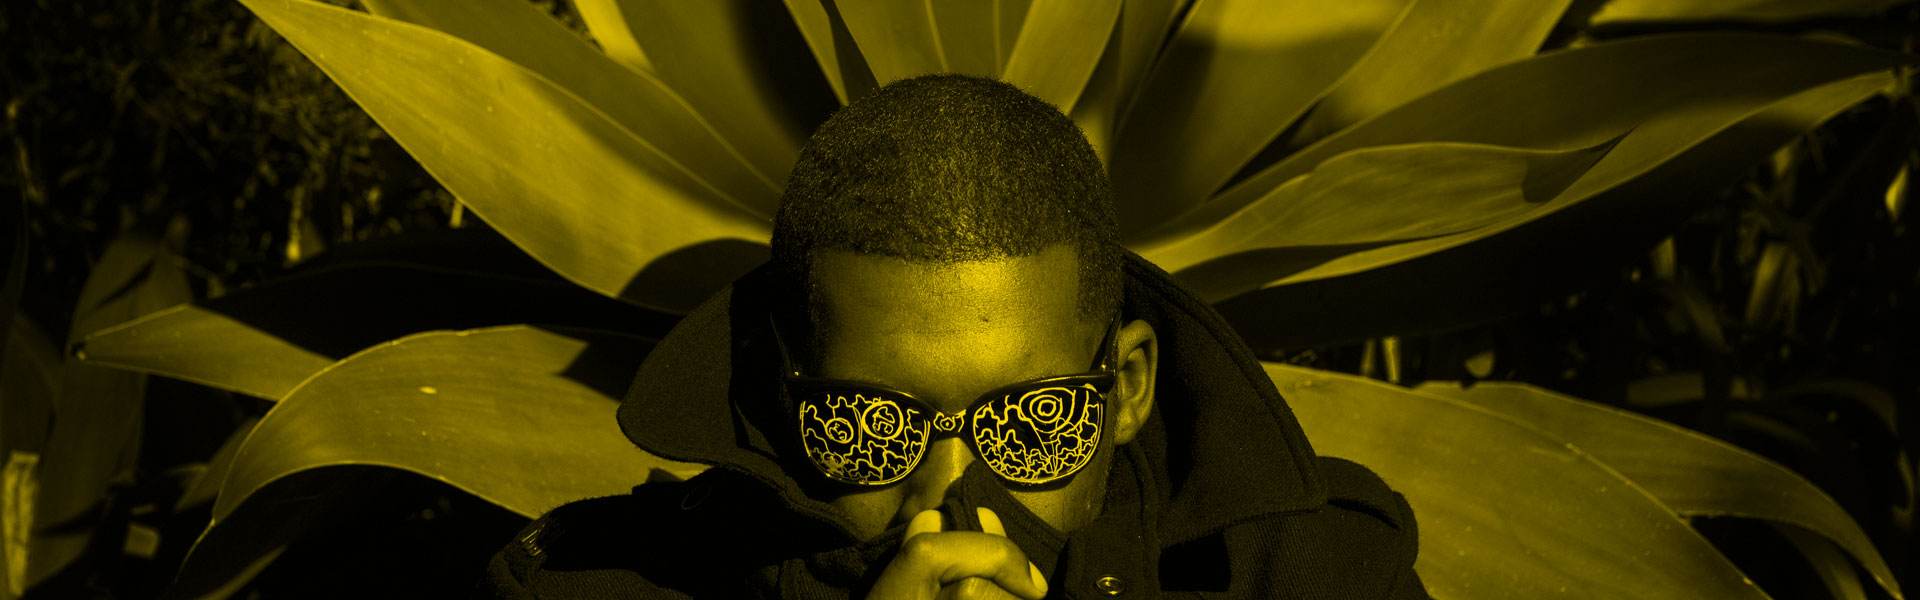 FLYING LOTUS. <br>Il fuoriclasse del groove